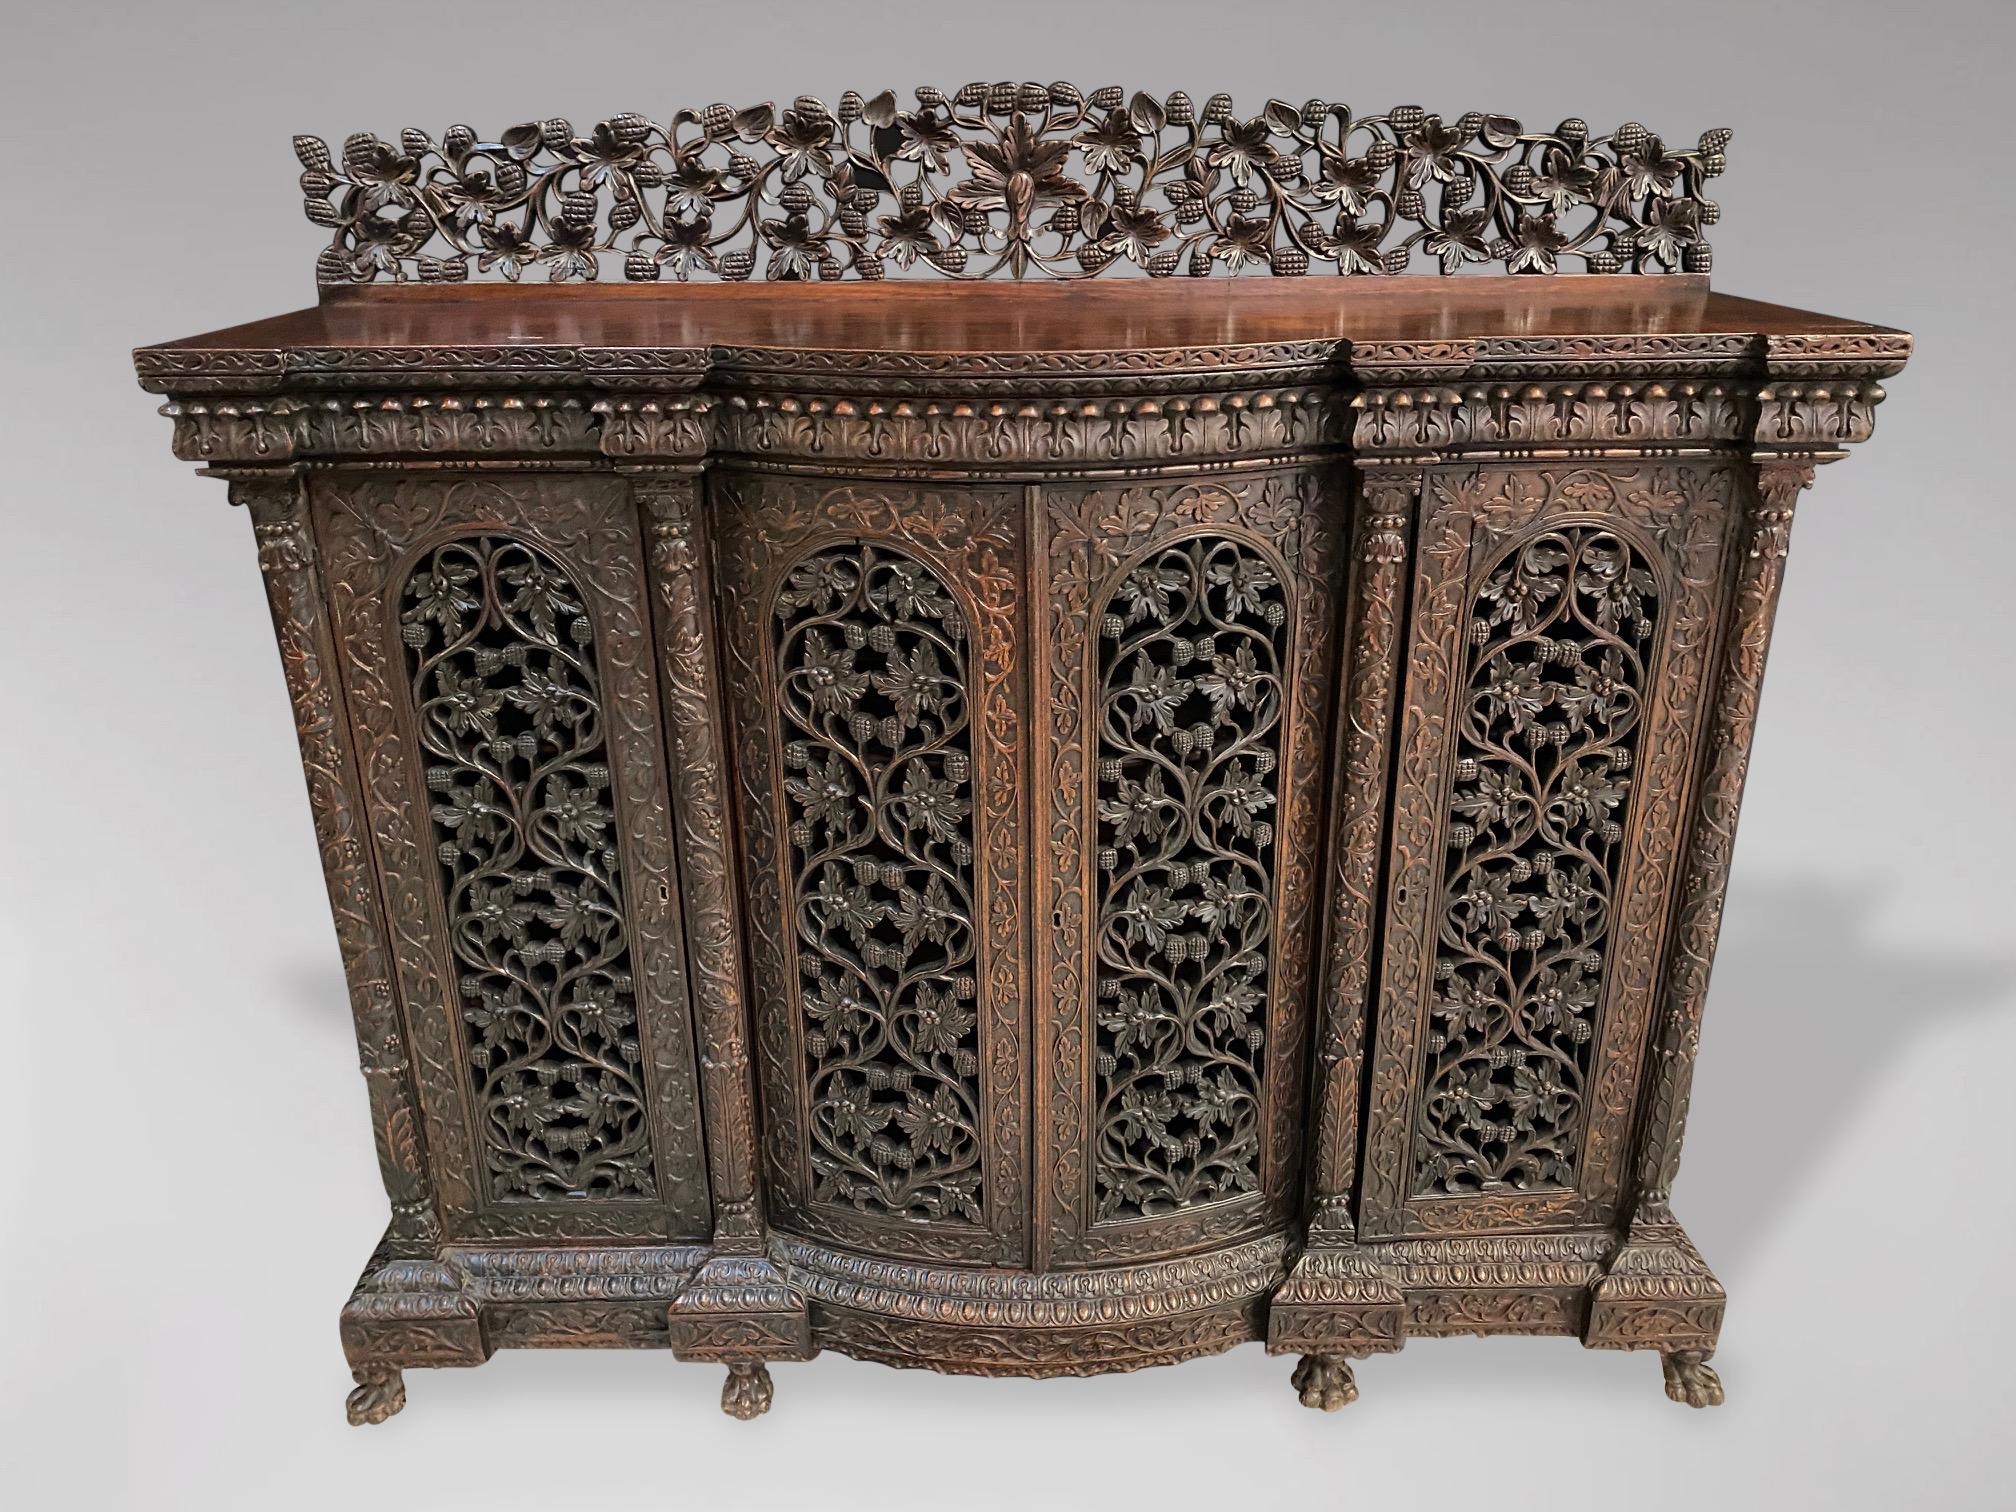 A mid 19th century, Victorian period, British colonial, Anglo-Indian carved and pierced serpentine sideboard in solid rosewood. The front is mounted with four hinged doors with dome shaped panelled doors enclosing shelves. All resting on six small,